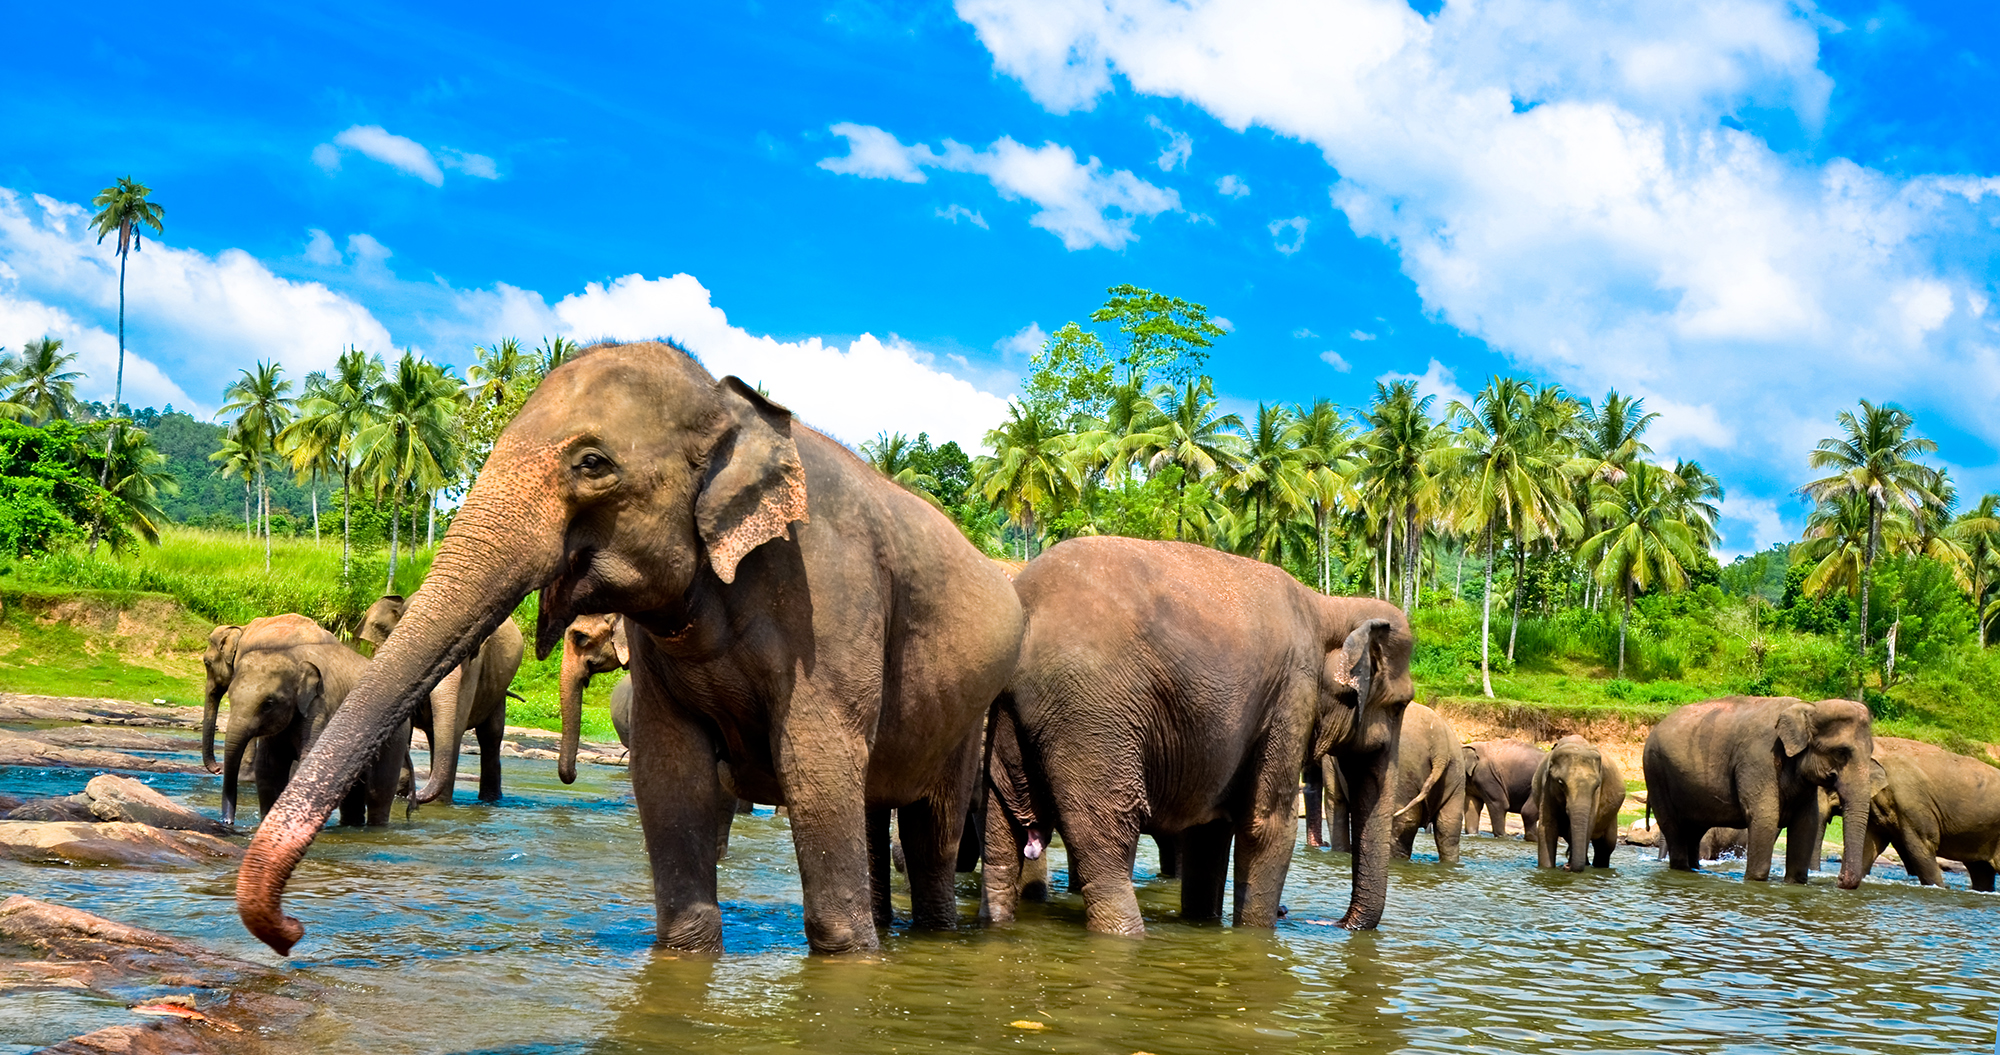 sri lanka uncover tour TruTravels south east asia backpacker group adventure